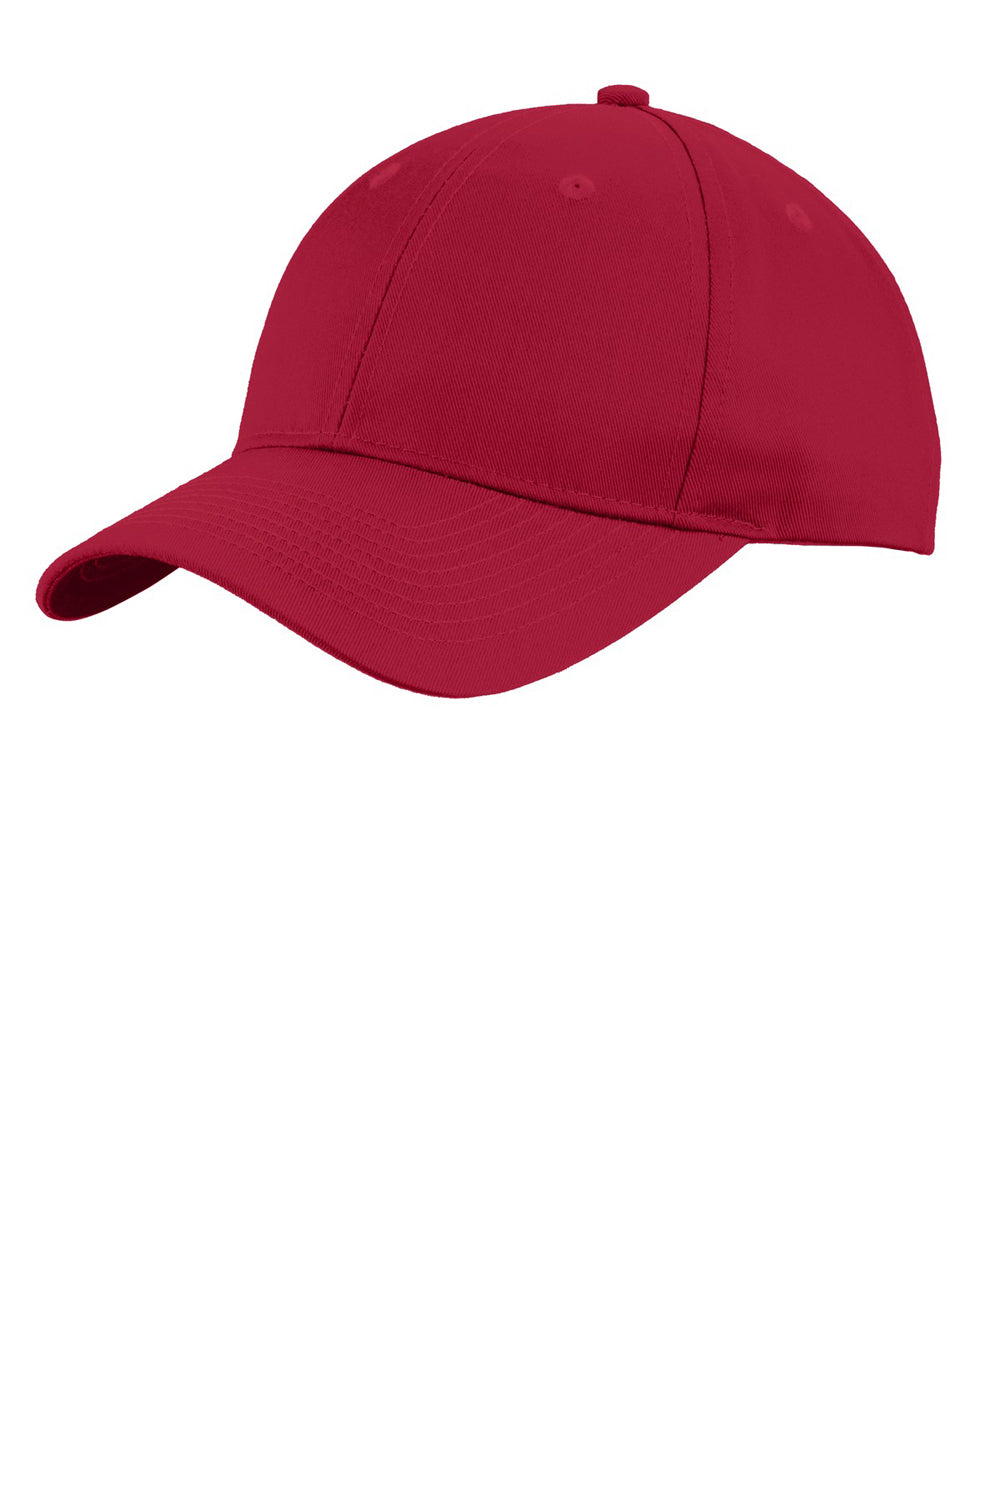 Port Authority C913 Mens Red Moisture Wicking Adjustable Hat